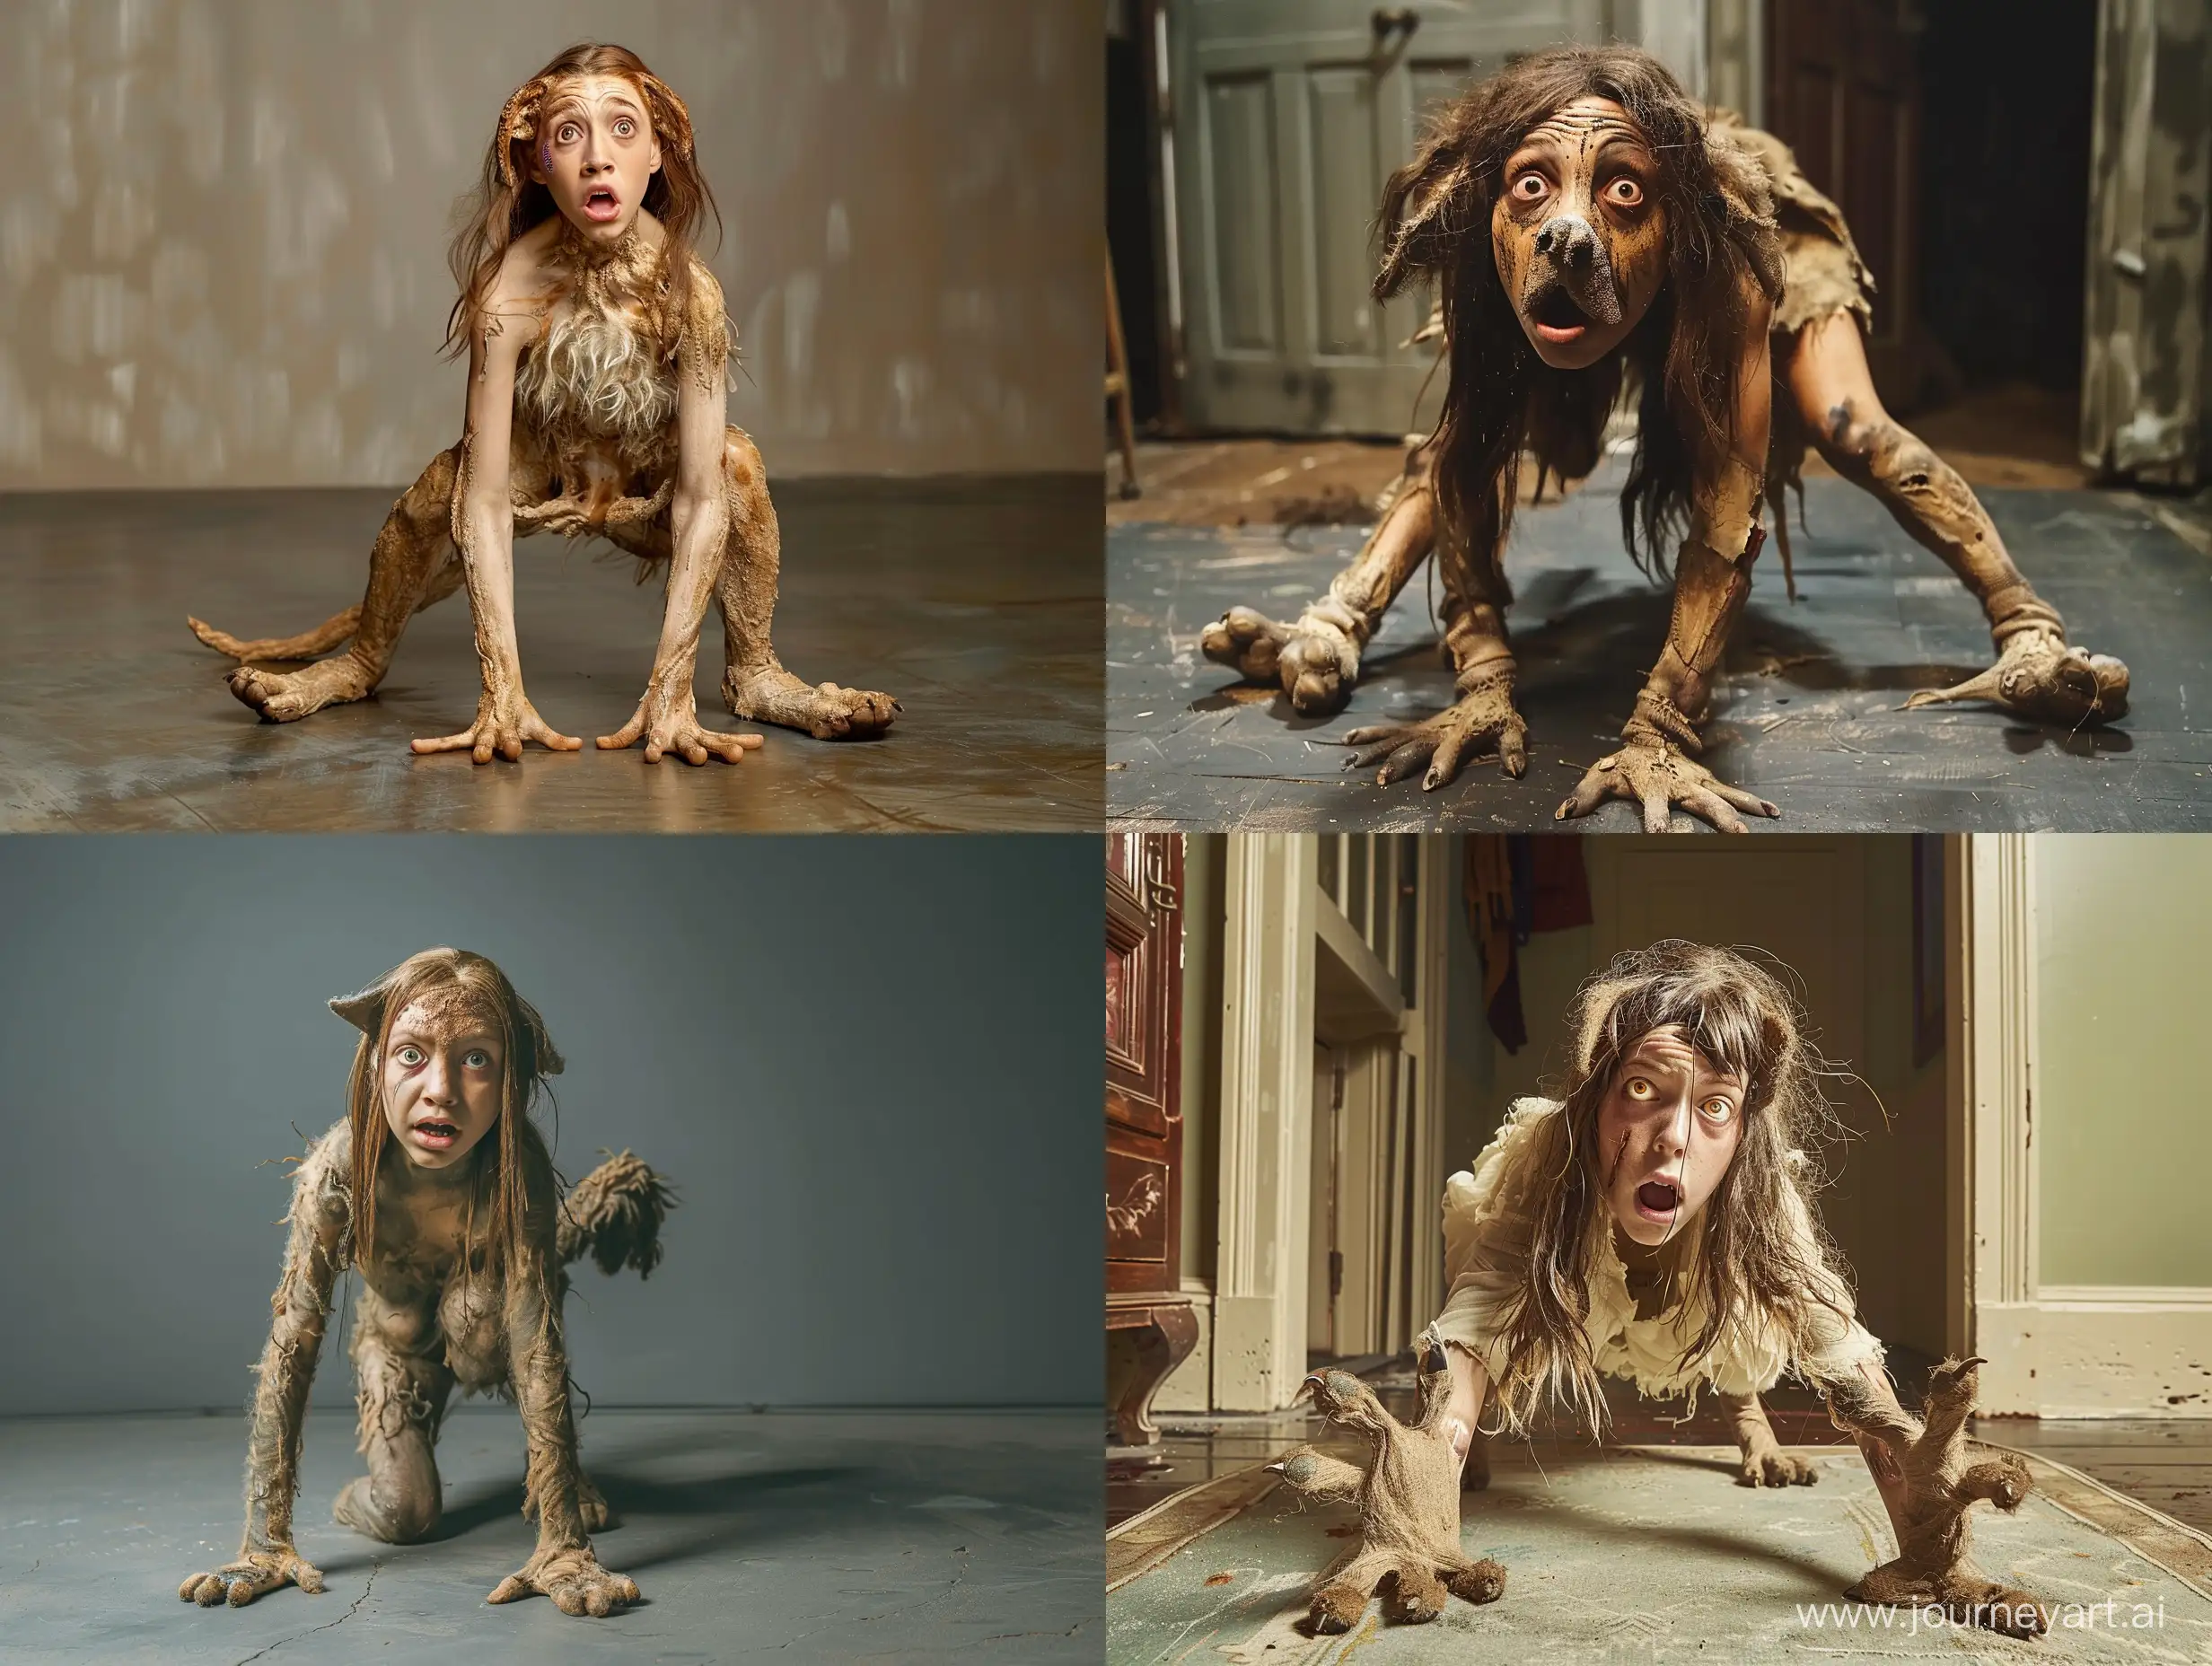 Enchanting-Transformation-Young-Woman-Transformed-into-a-Dog